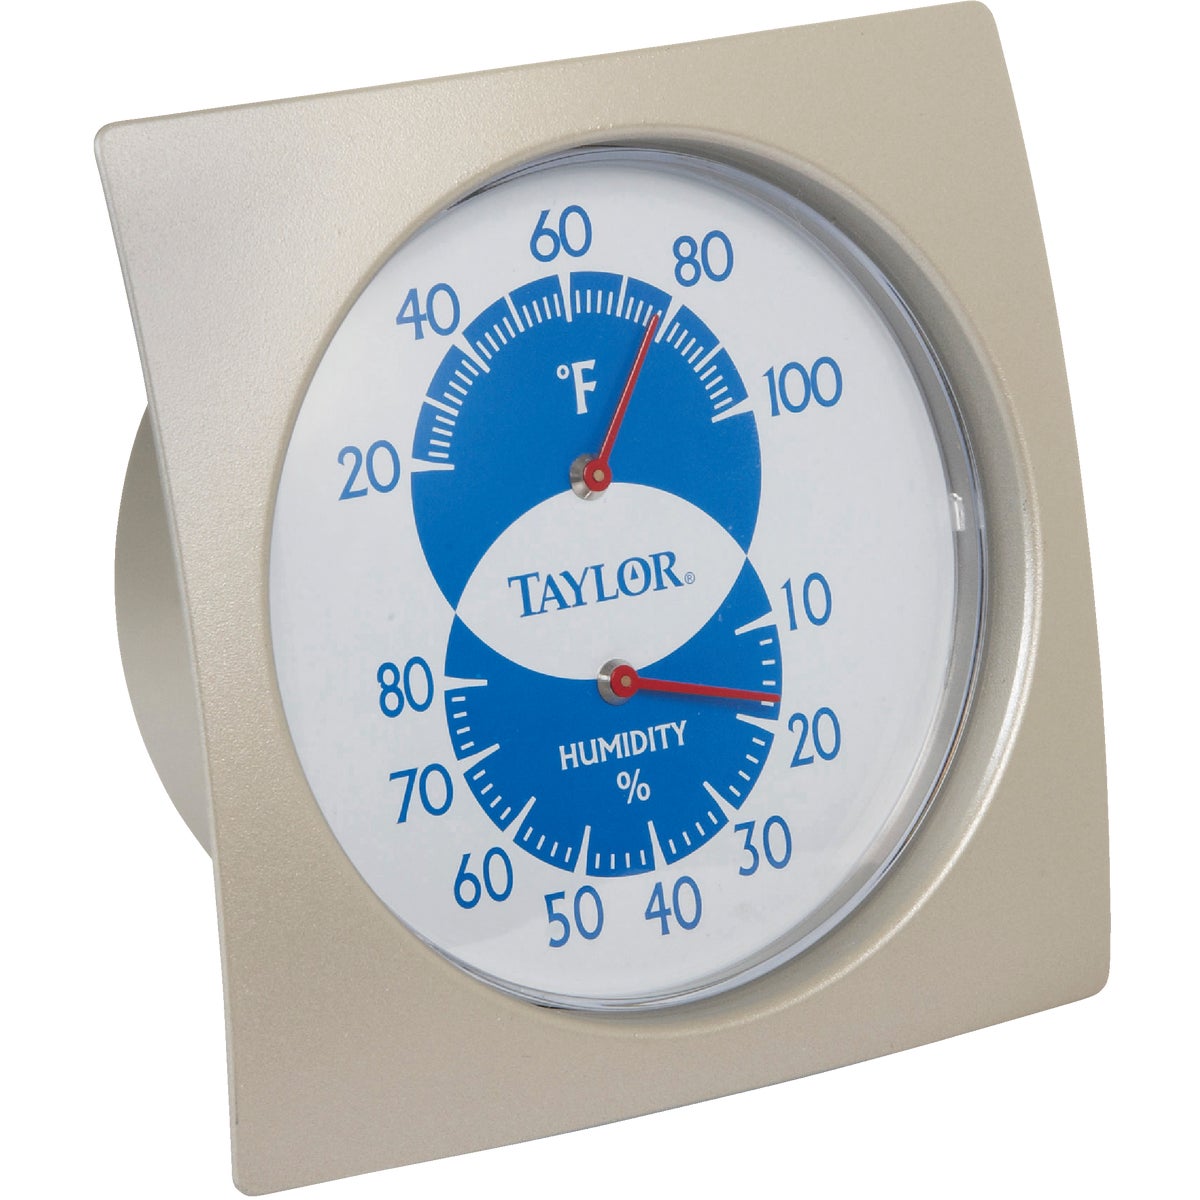 Item 604402, New shape and dial. Displays relative humidity and temperature.